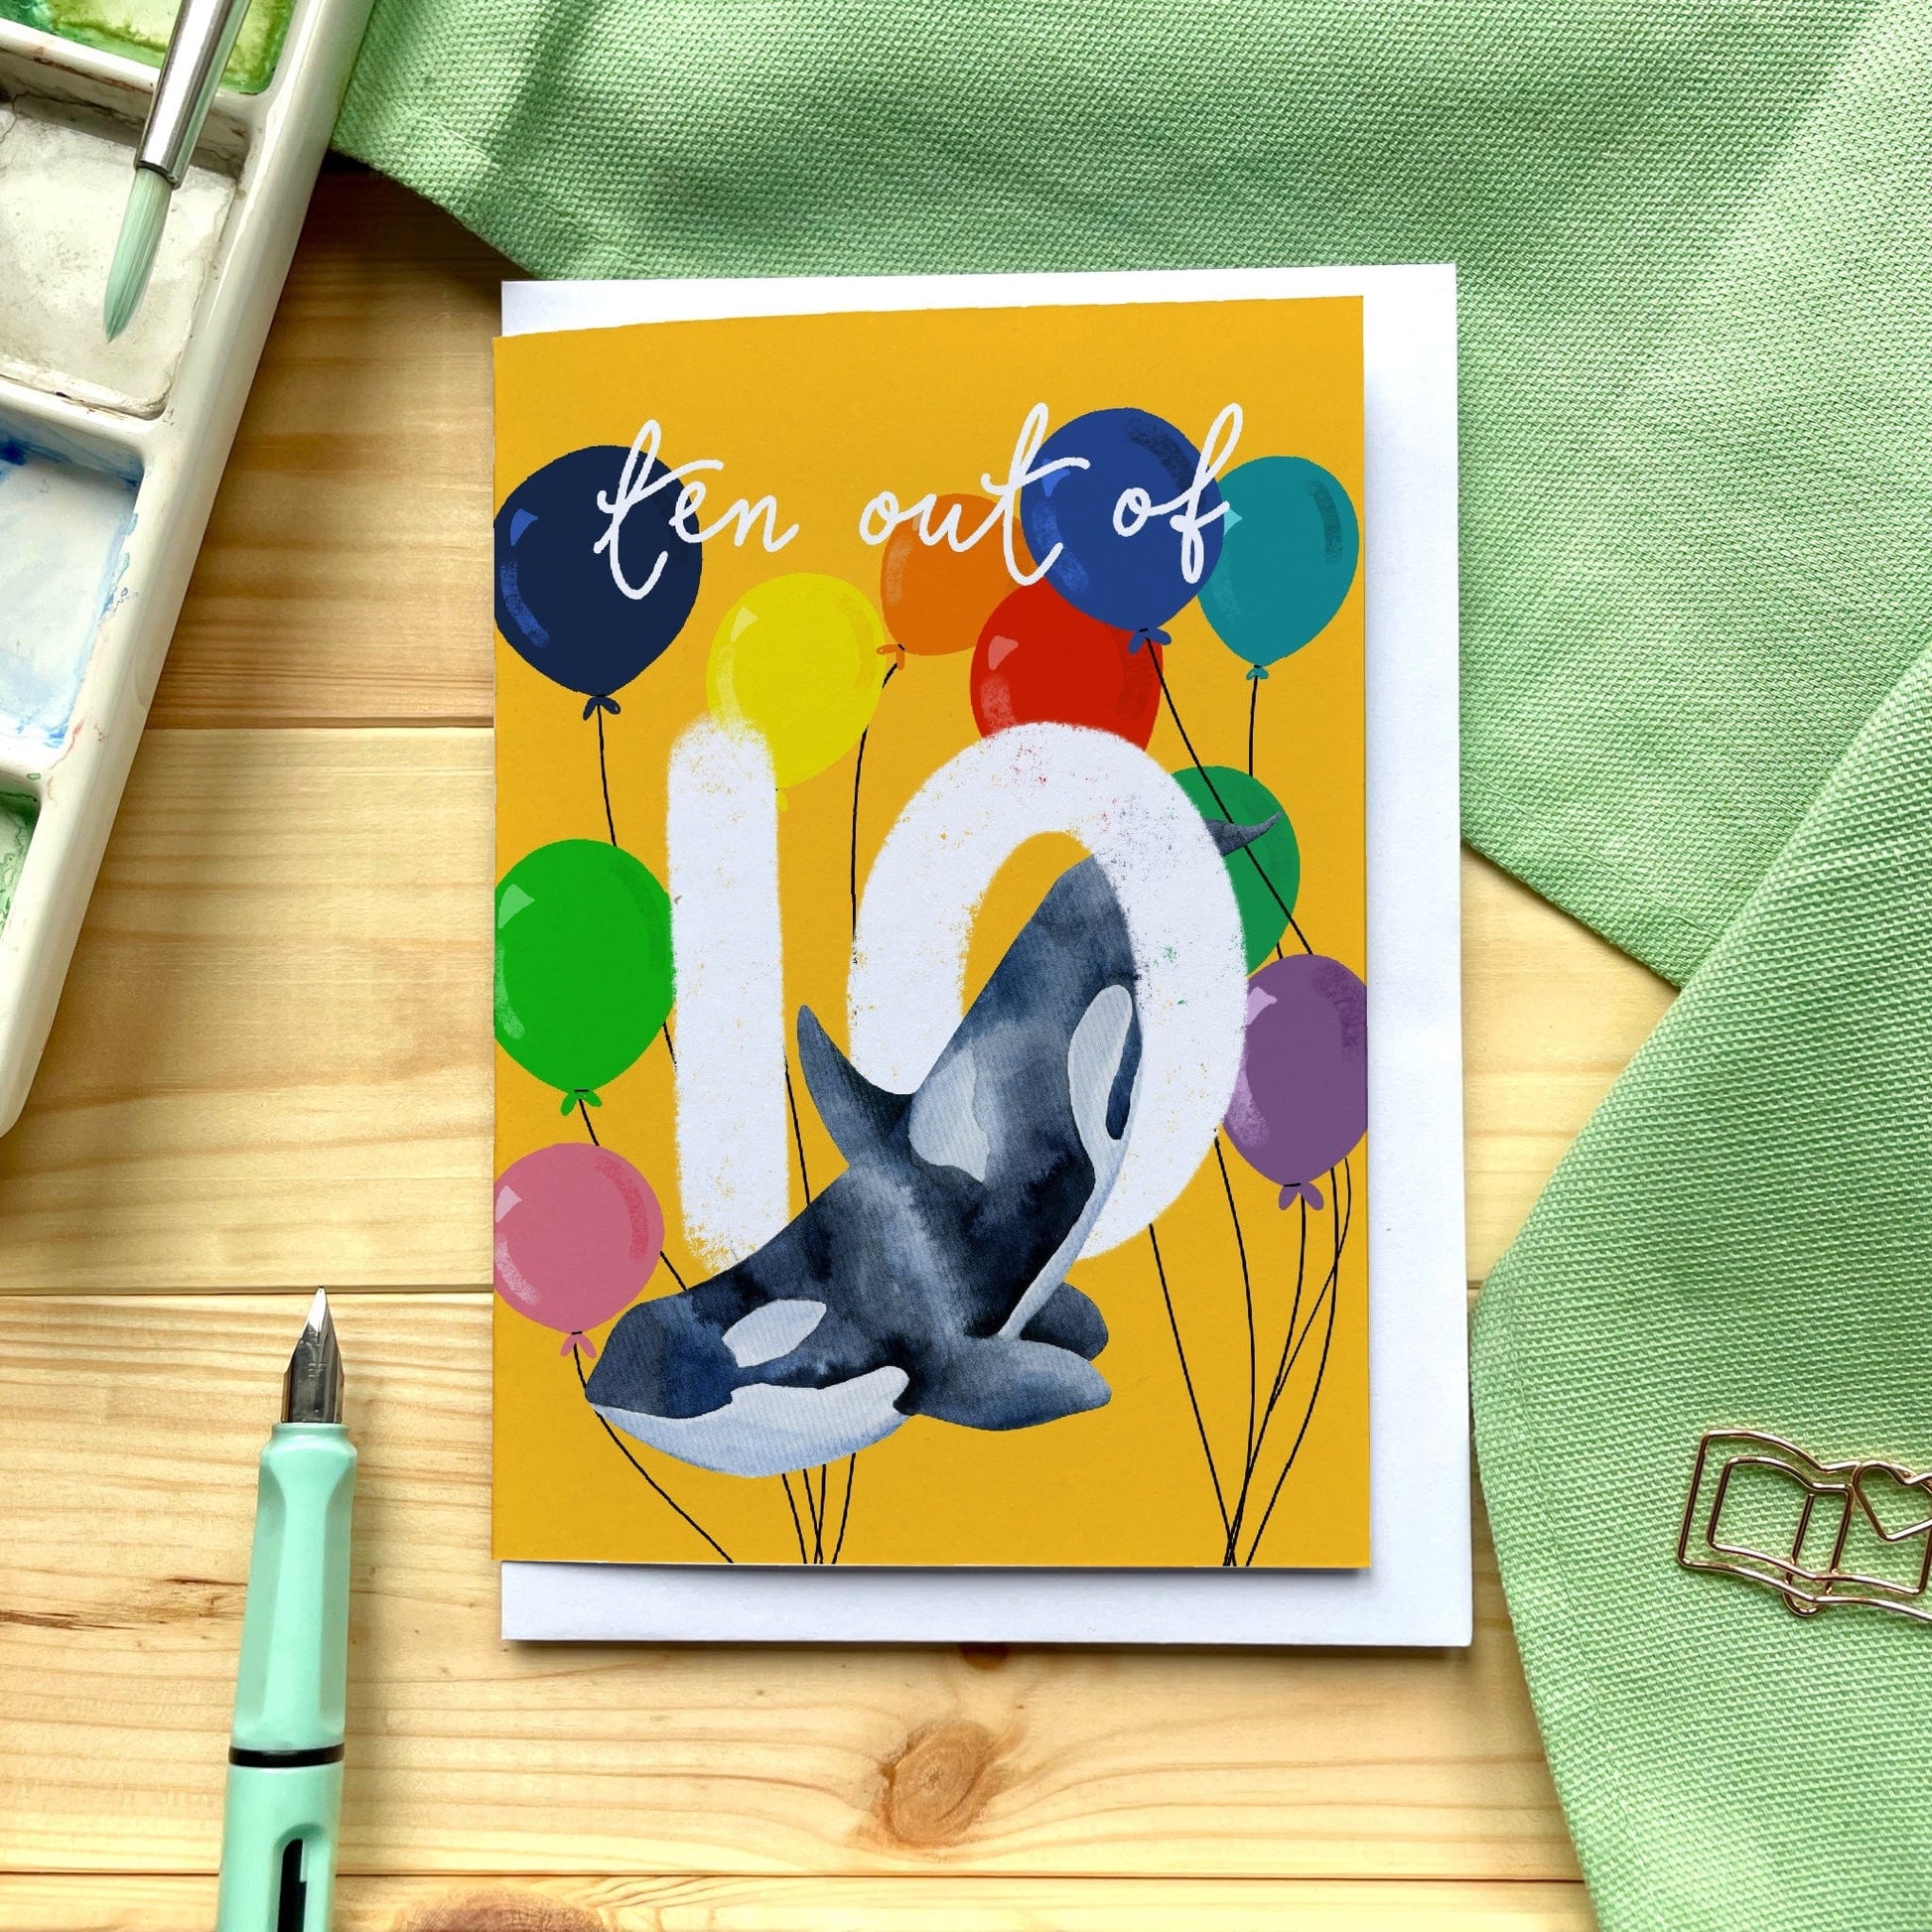 Orca Whale Tenth birthday Card - Bright “Ten out of 10” And Hope Designs Cards